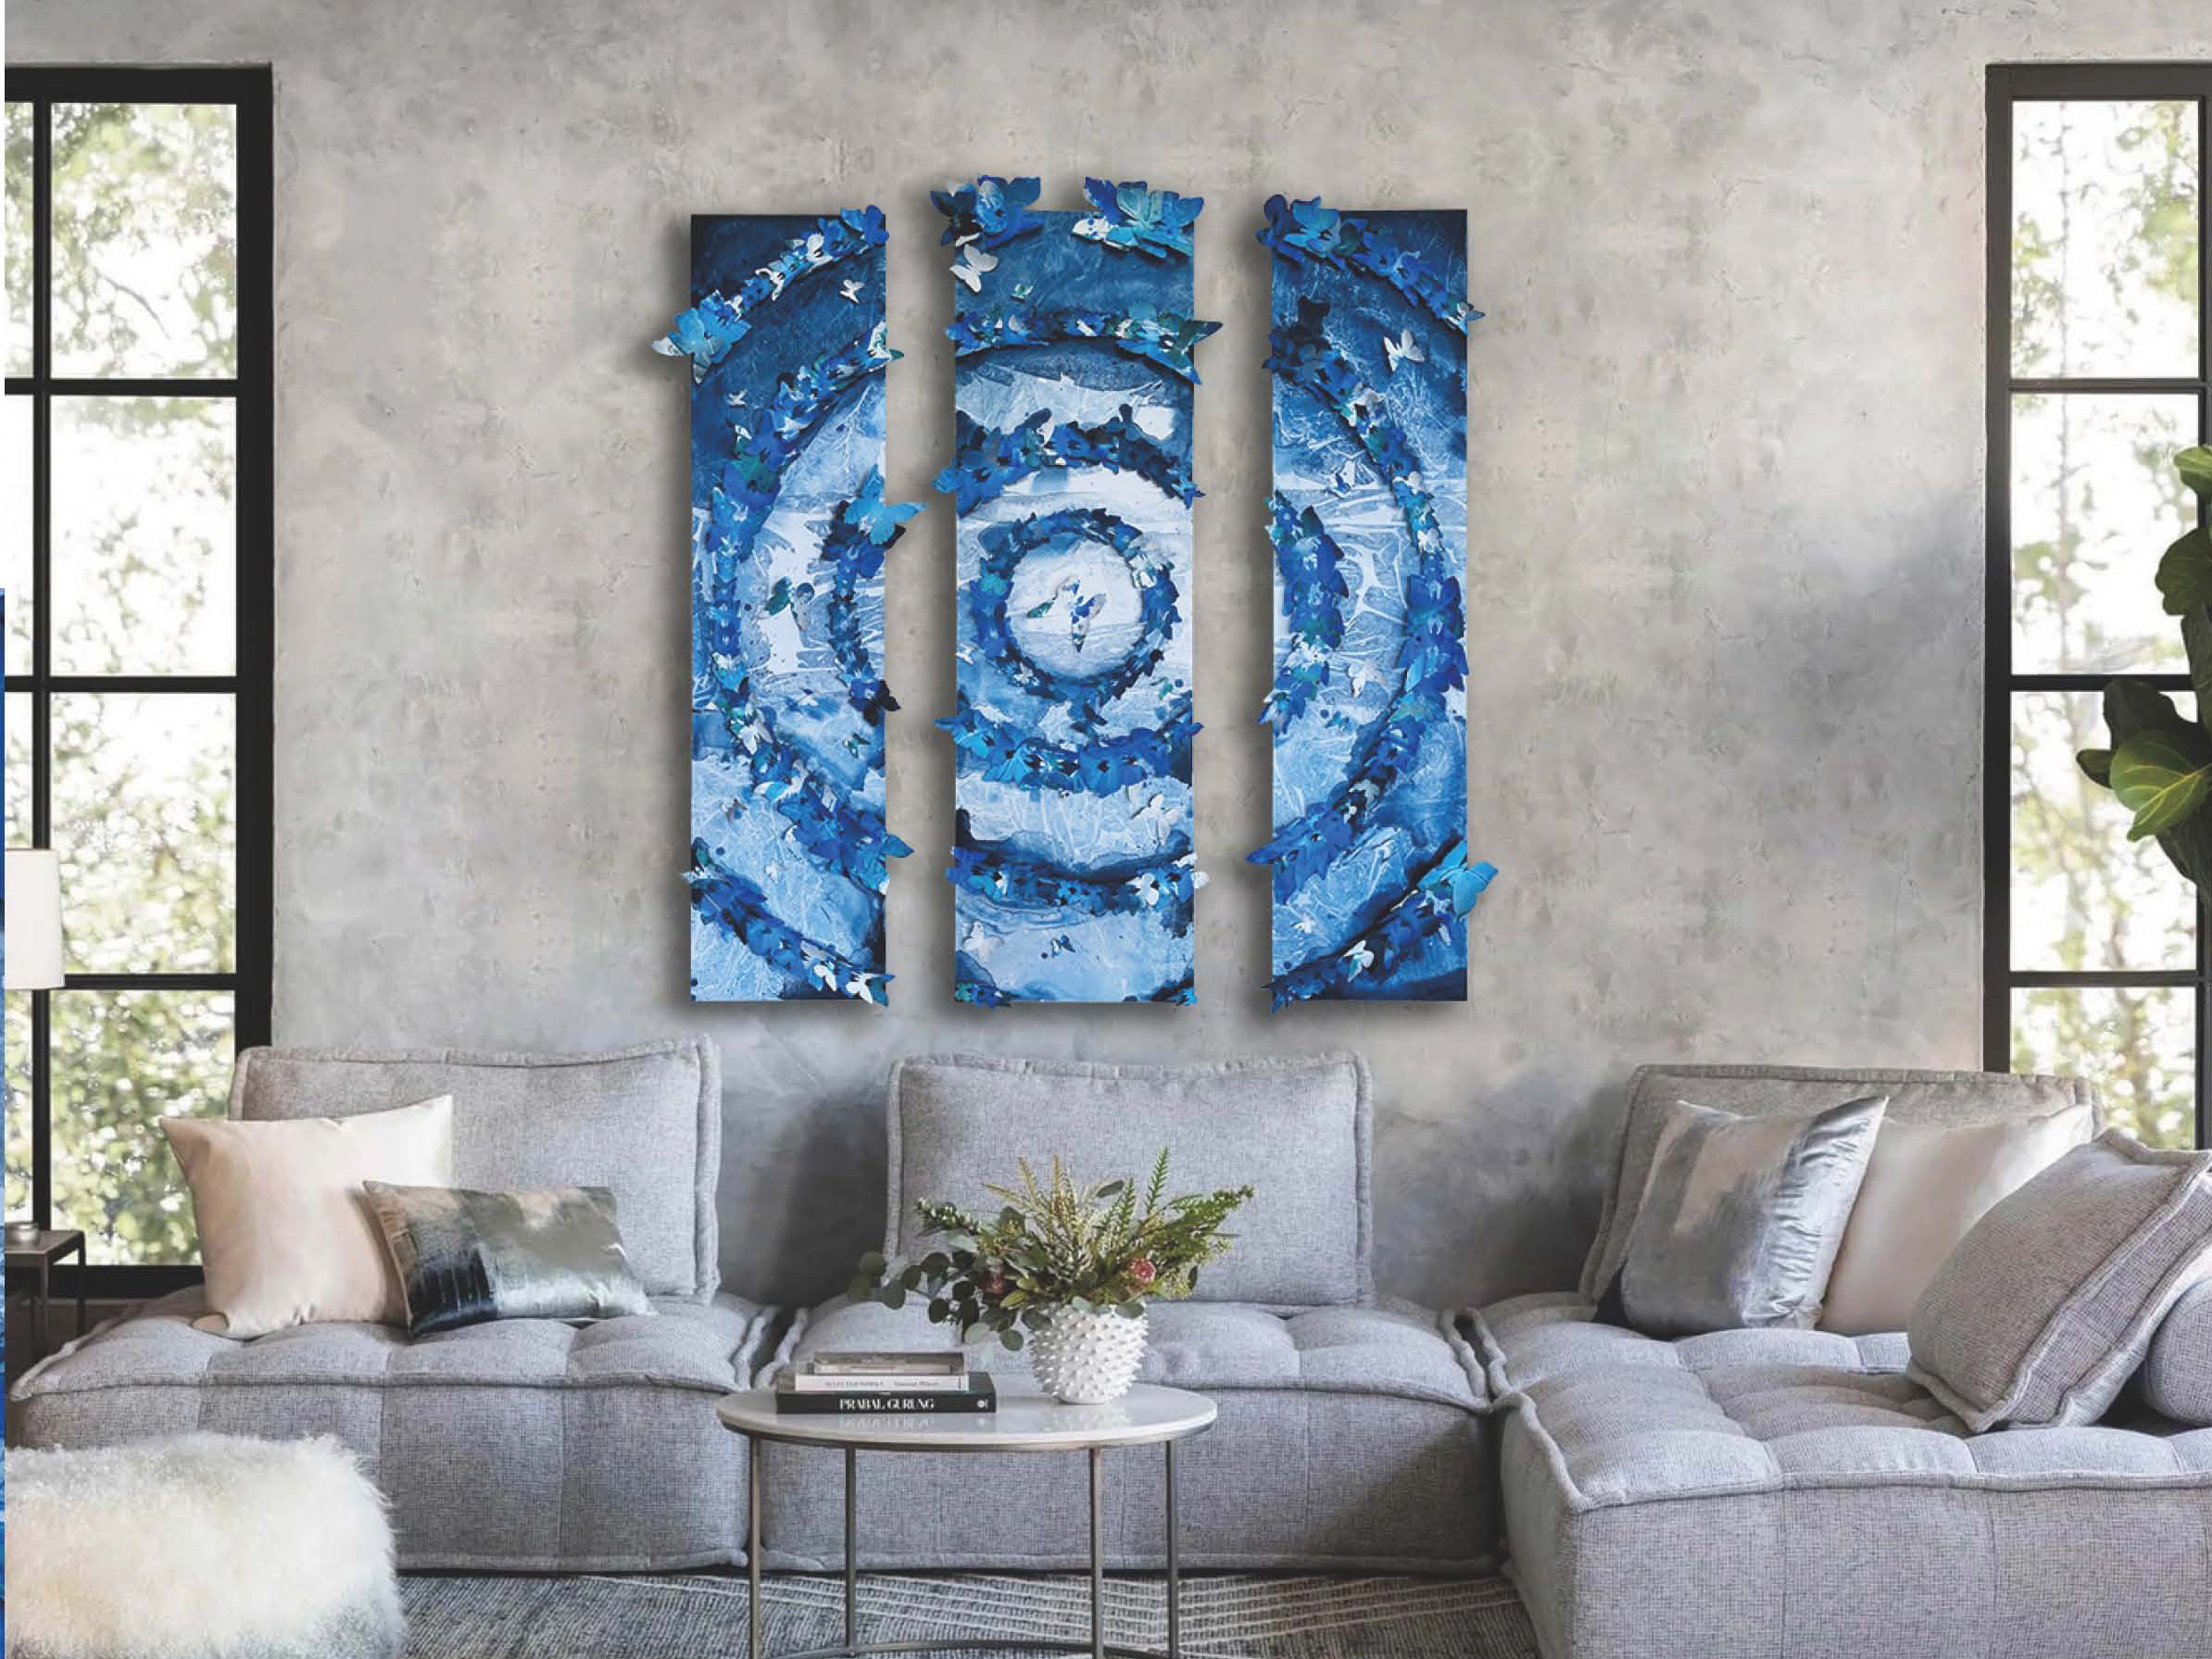 Incorporating Beautiful Blues into Your Home Design